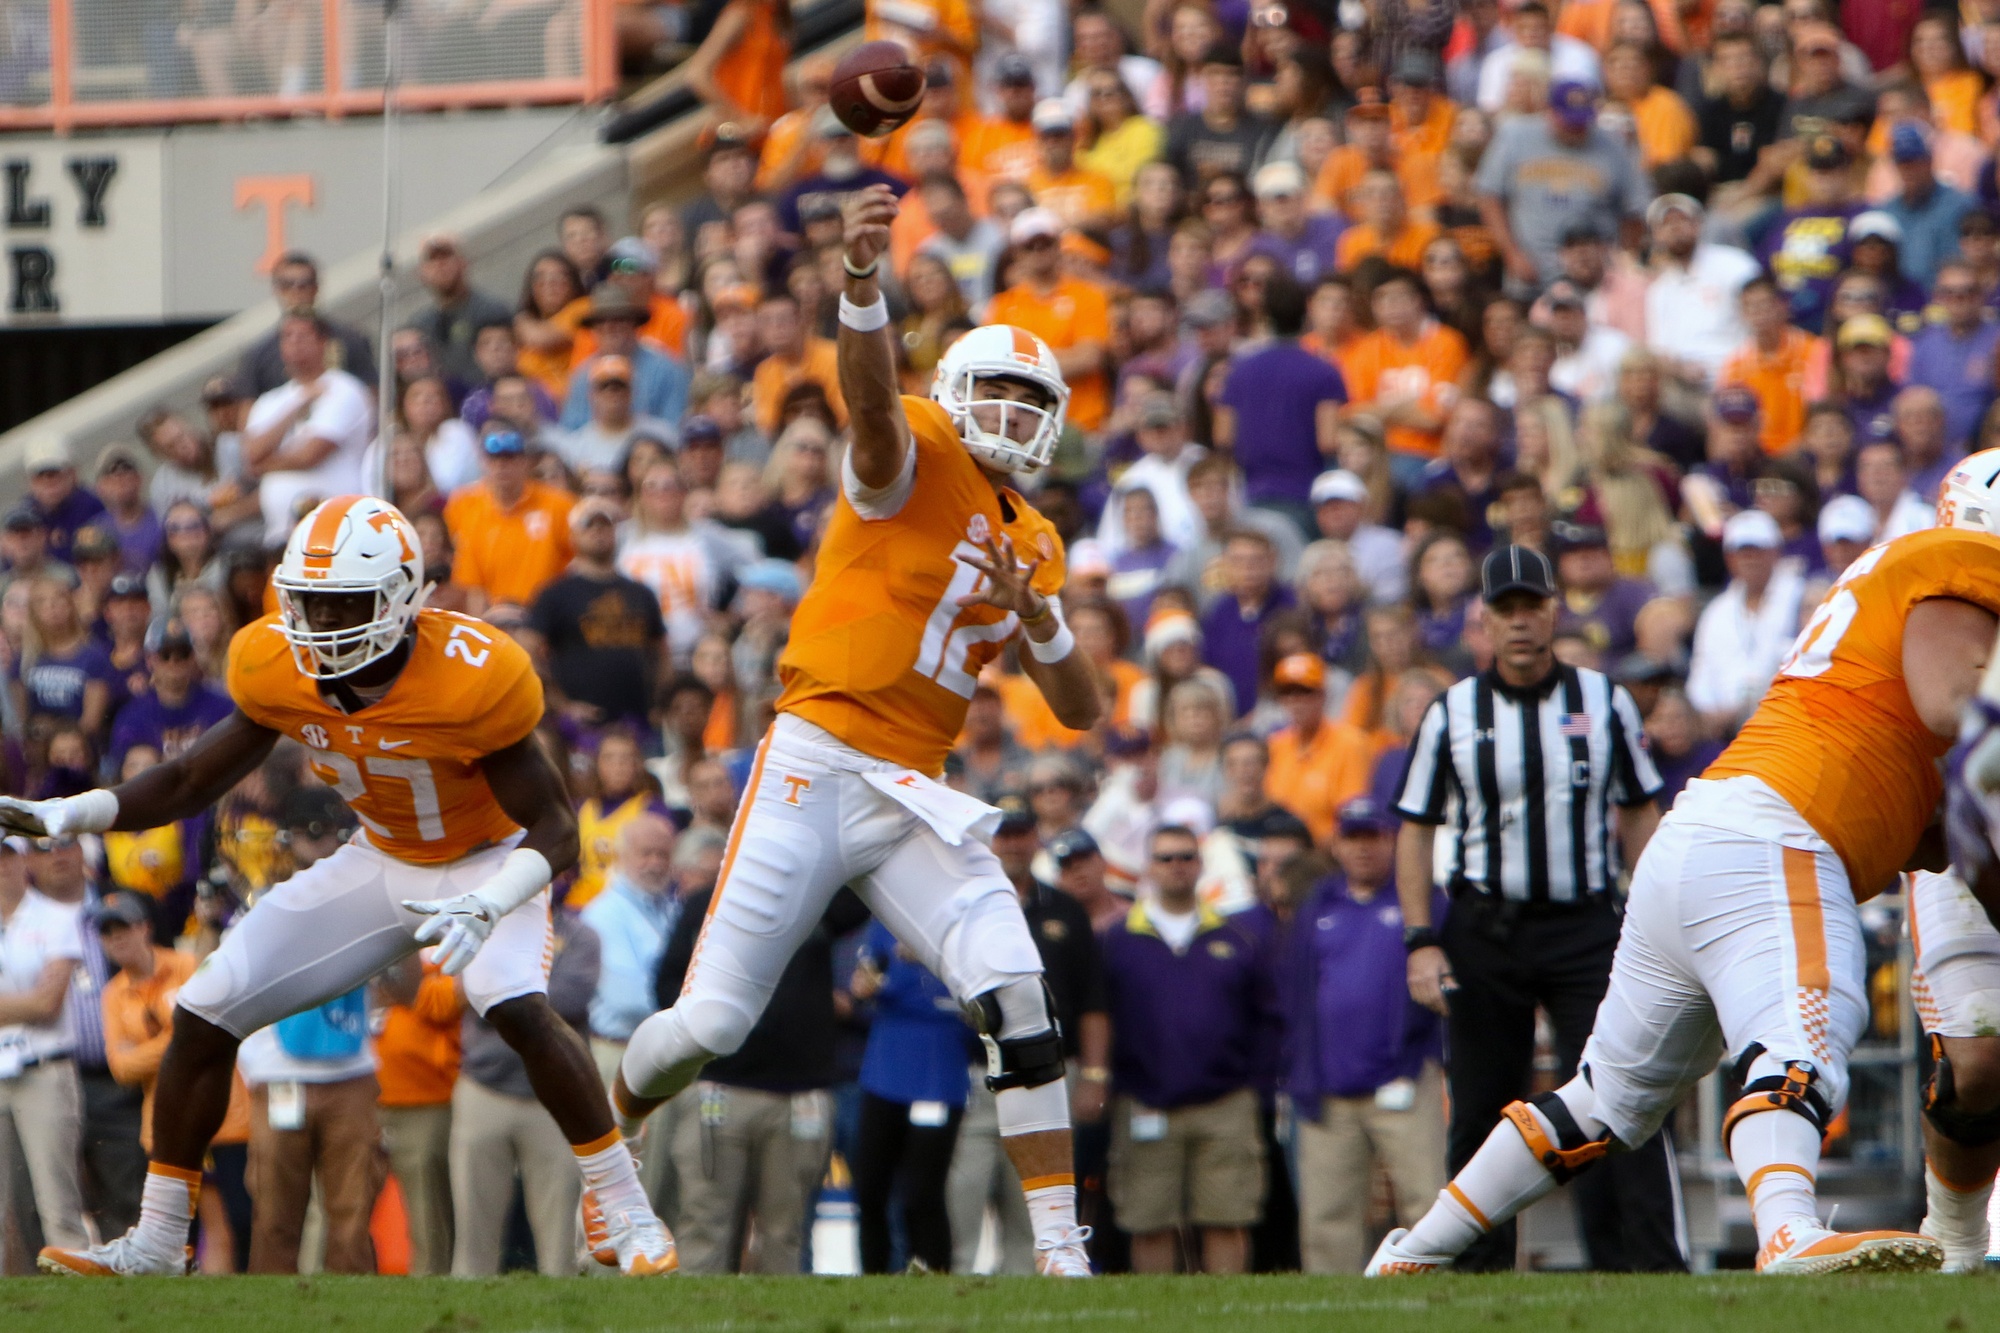 Nov 5, 2016; Knoxville, TN, USA; Tennessee Volunteers quarterback Quinten Dormady (12) throws a pass during the second quarter against the Tennessee Tech Golden Eagles at Neyland Stadium. Mandatory Credit: Randy Sartin-USA TODAY Sports